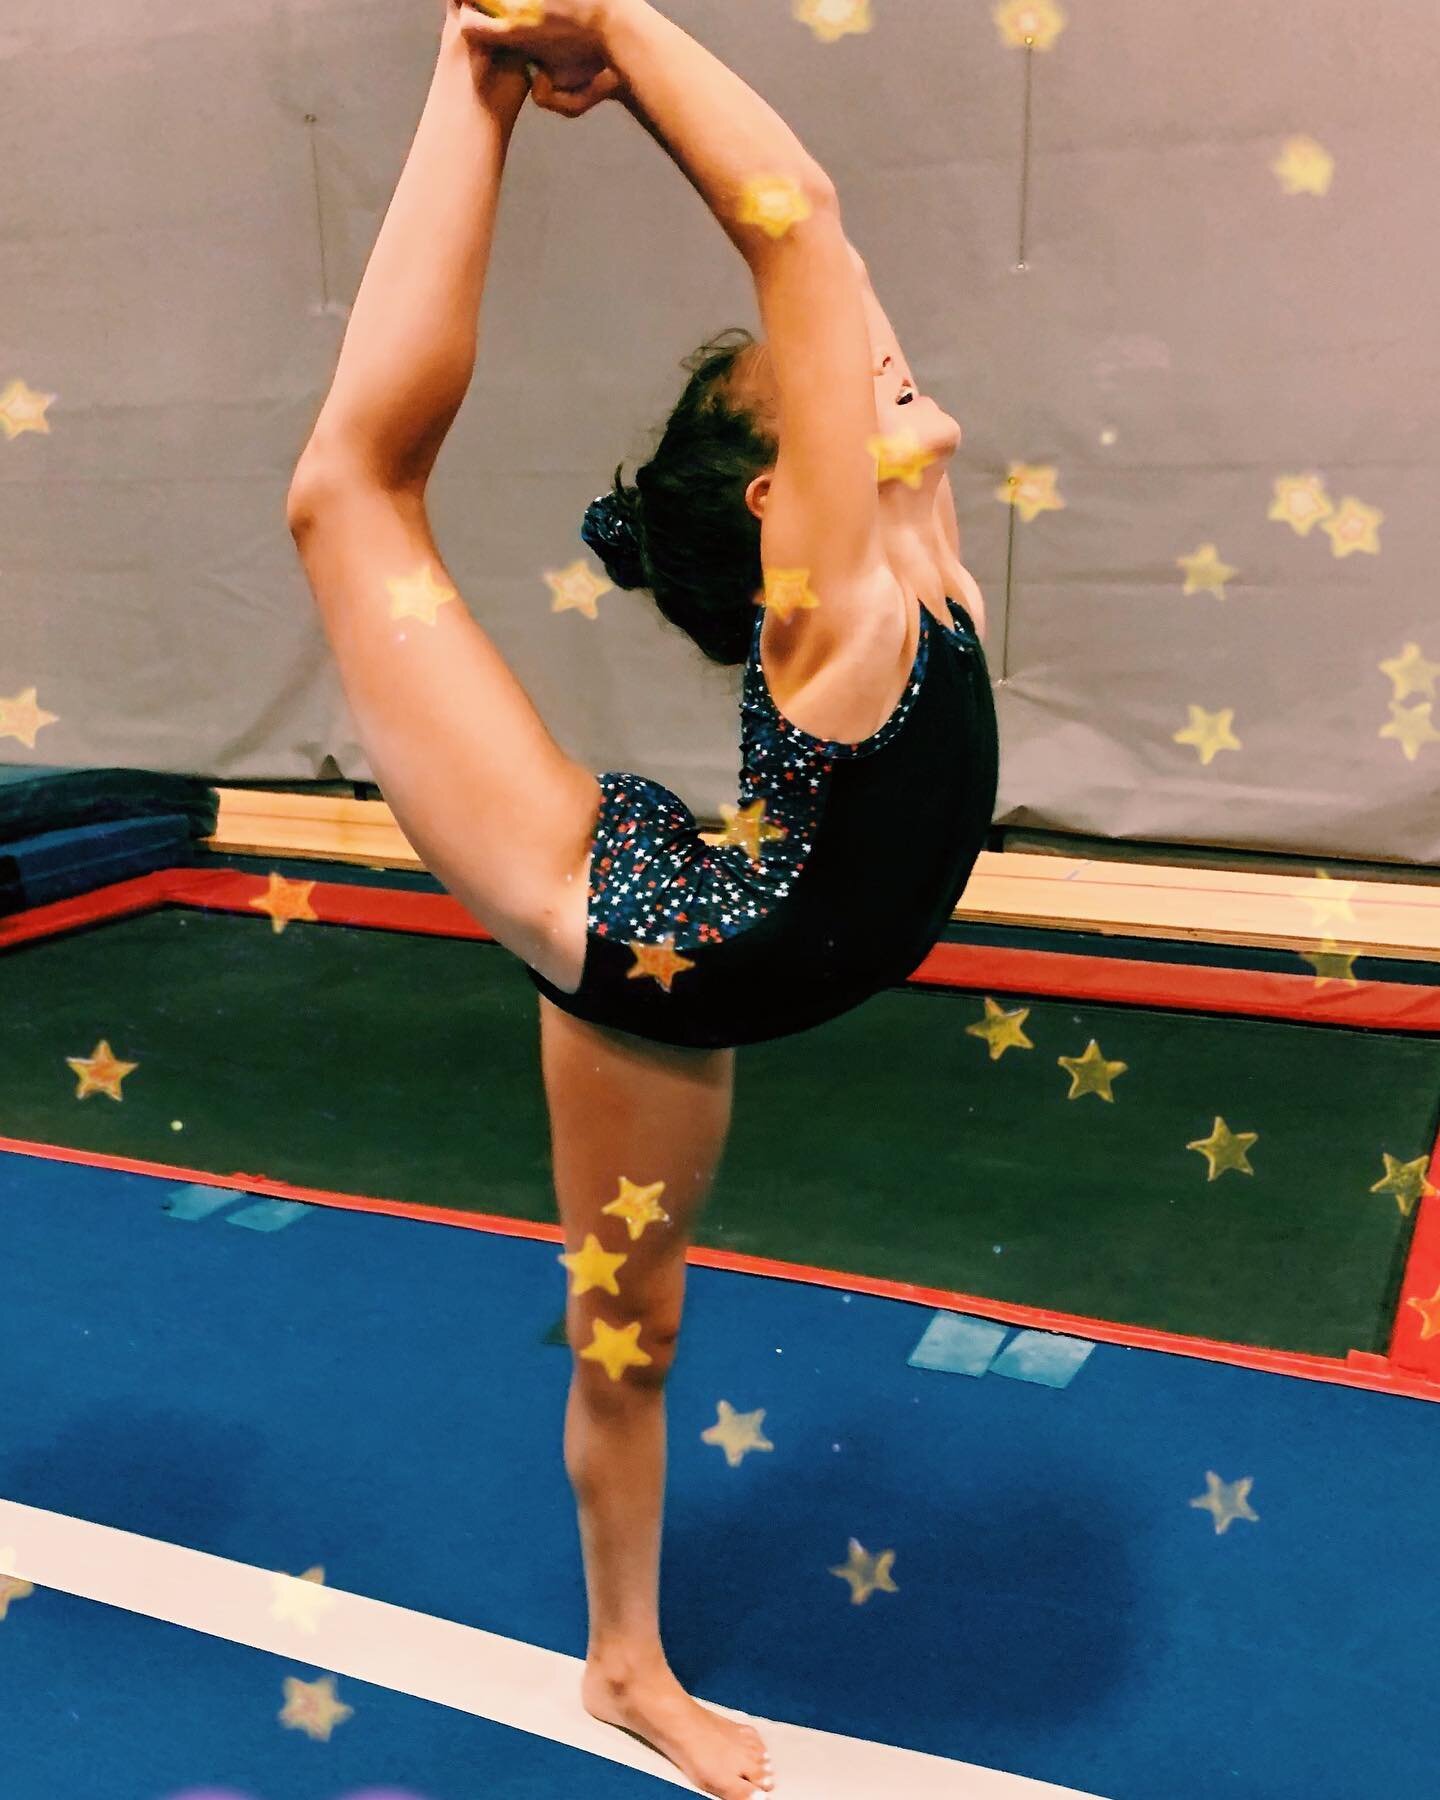 Sign up for Recreational Gymnastics &amp; Private Lessons on our website TODAY! 🌈🌸🌟🦋 #recreationalgymnastics #privatelessons #scorpion #flexible #localbusiness